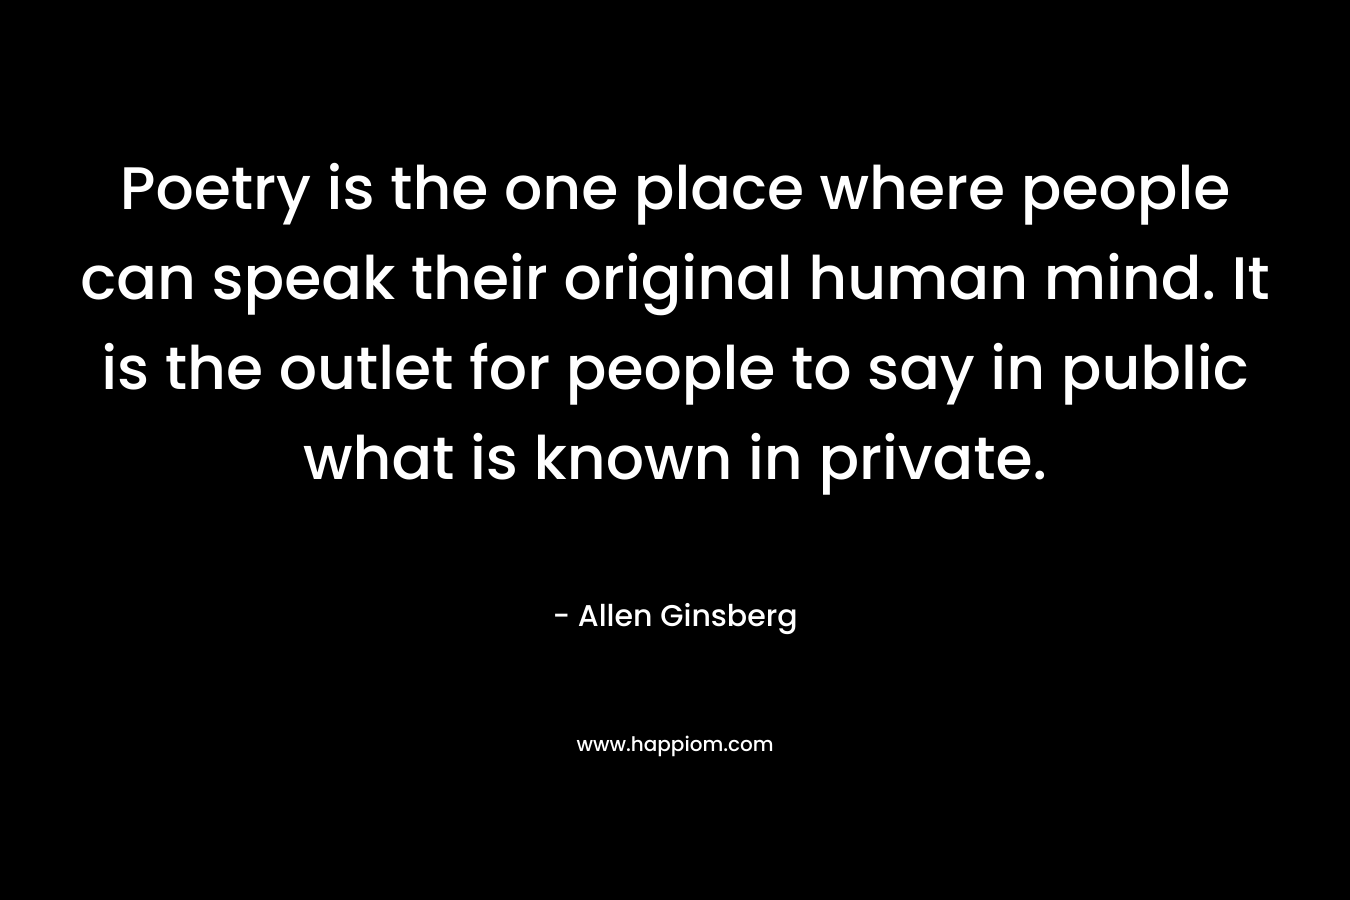 Poetry is the one place where people can speak their original human mind. It is the outlet for people to say in public what is known in private.  – Allen Ginsberg